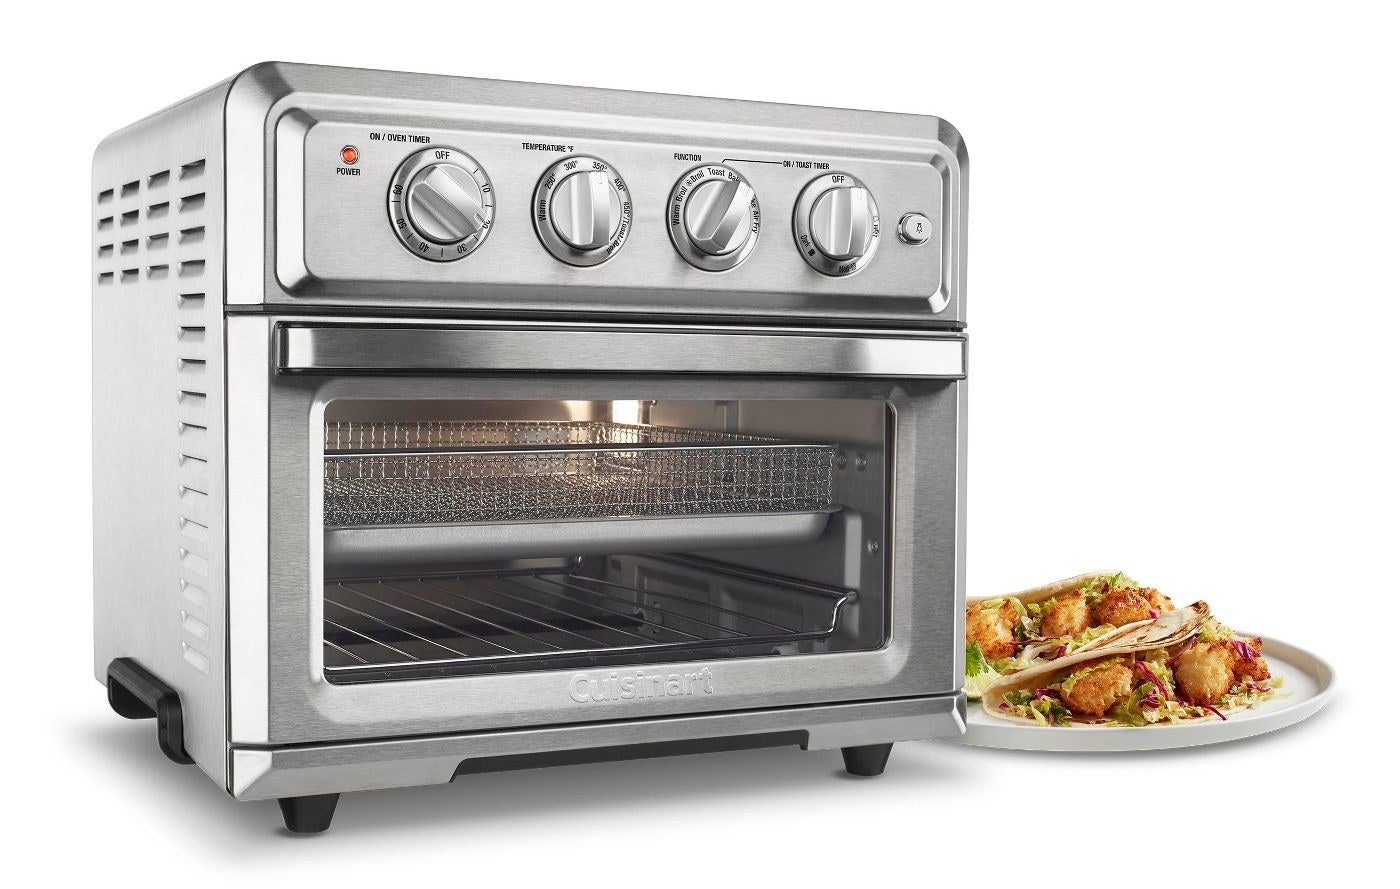 The toaster oven and air fryer